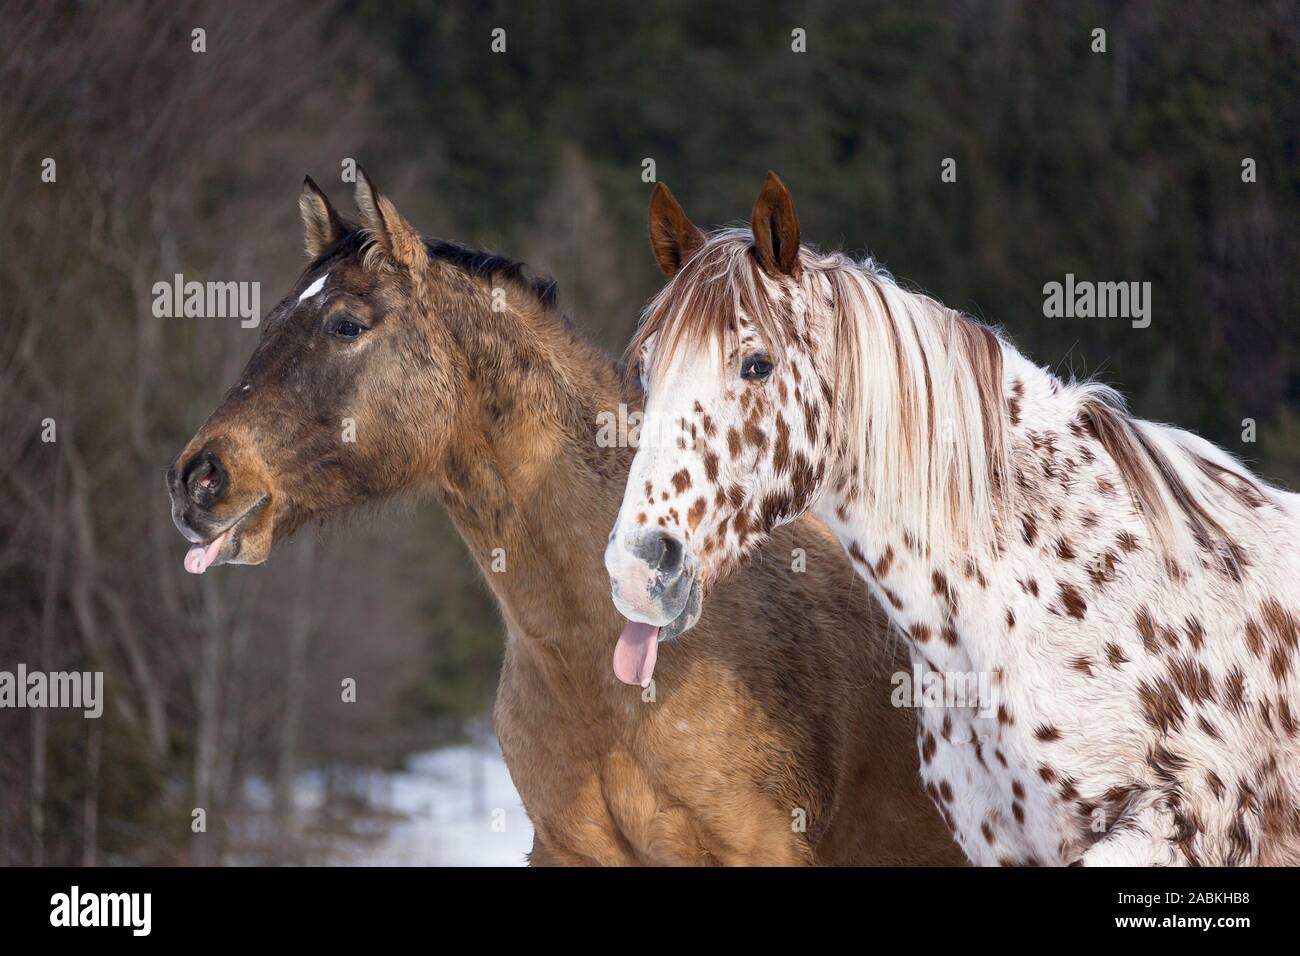 Appaloosa horse. Two adults sticking out their tongues. Bavaria, Germany Stock Photo